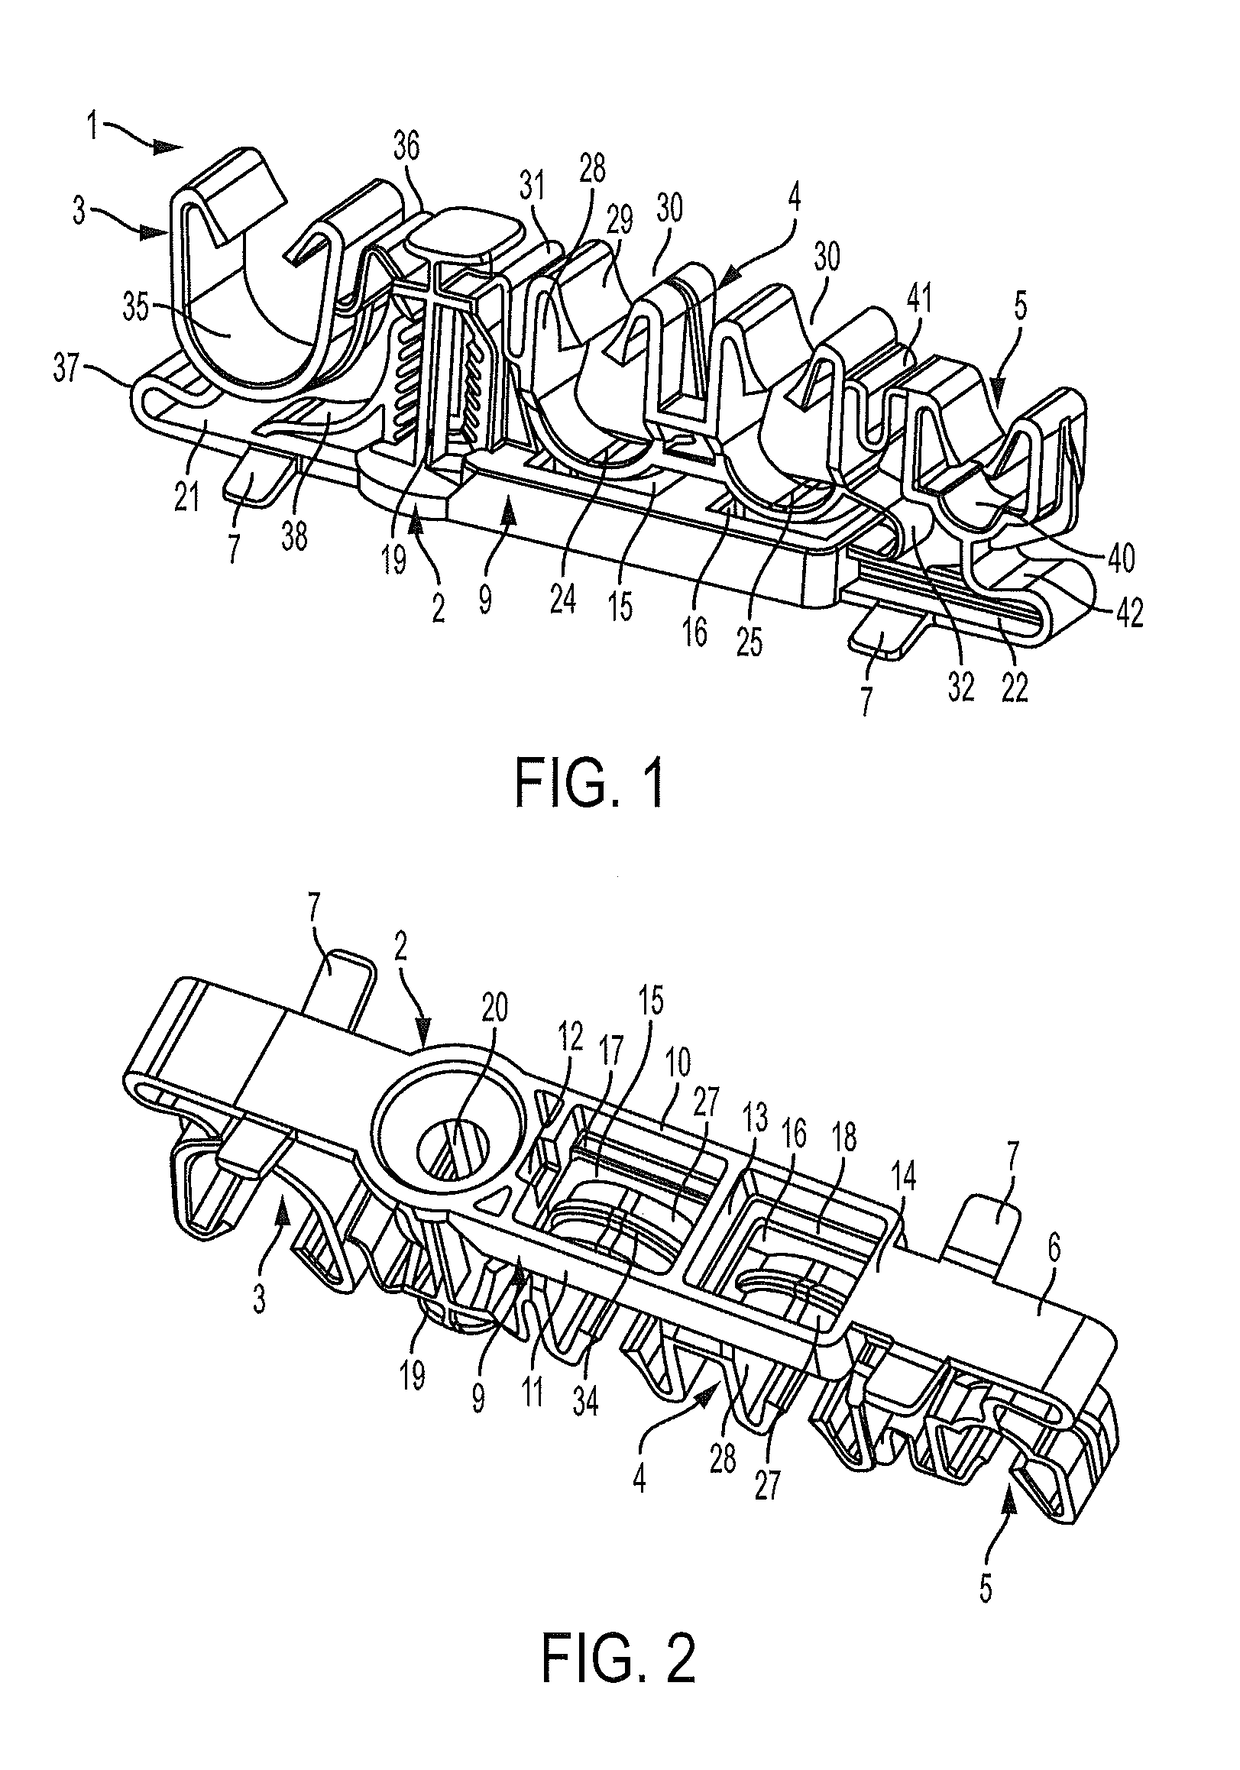 Plastic holder for anti-vibration fastening an elongated object